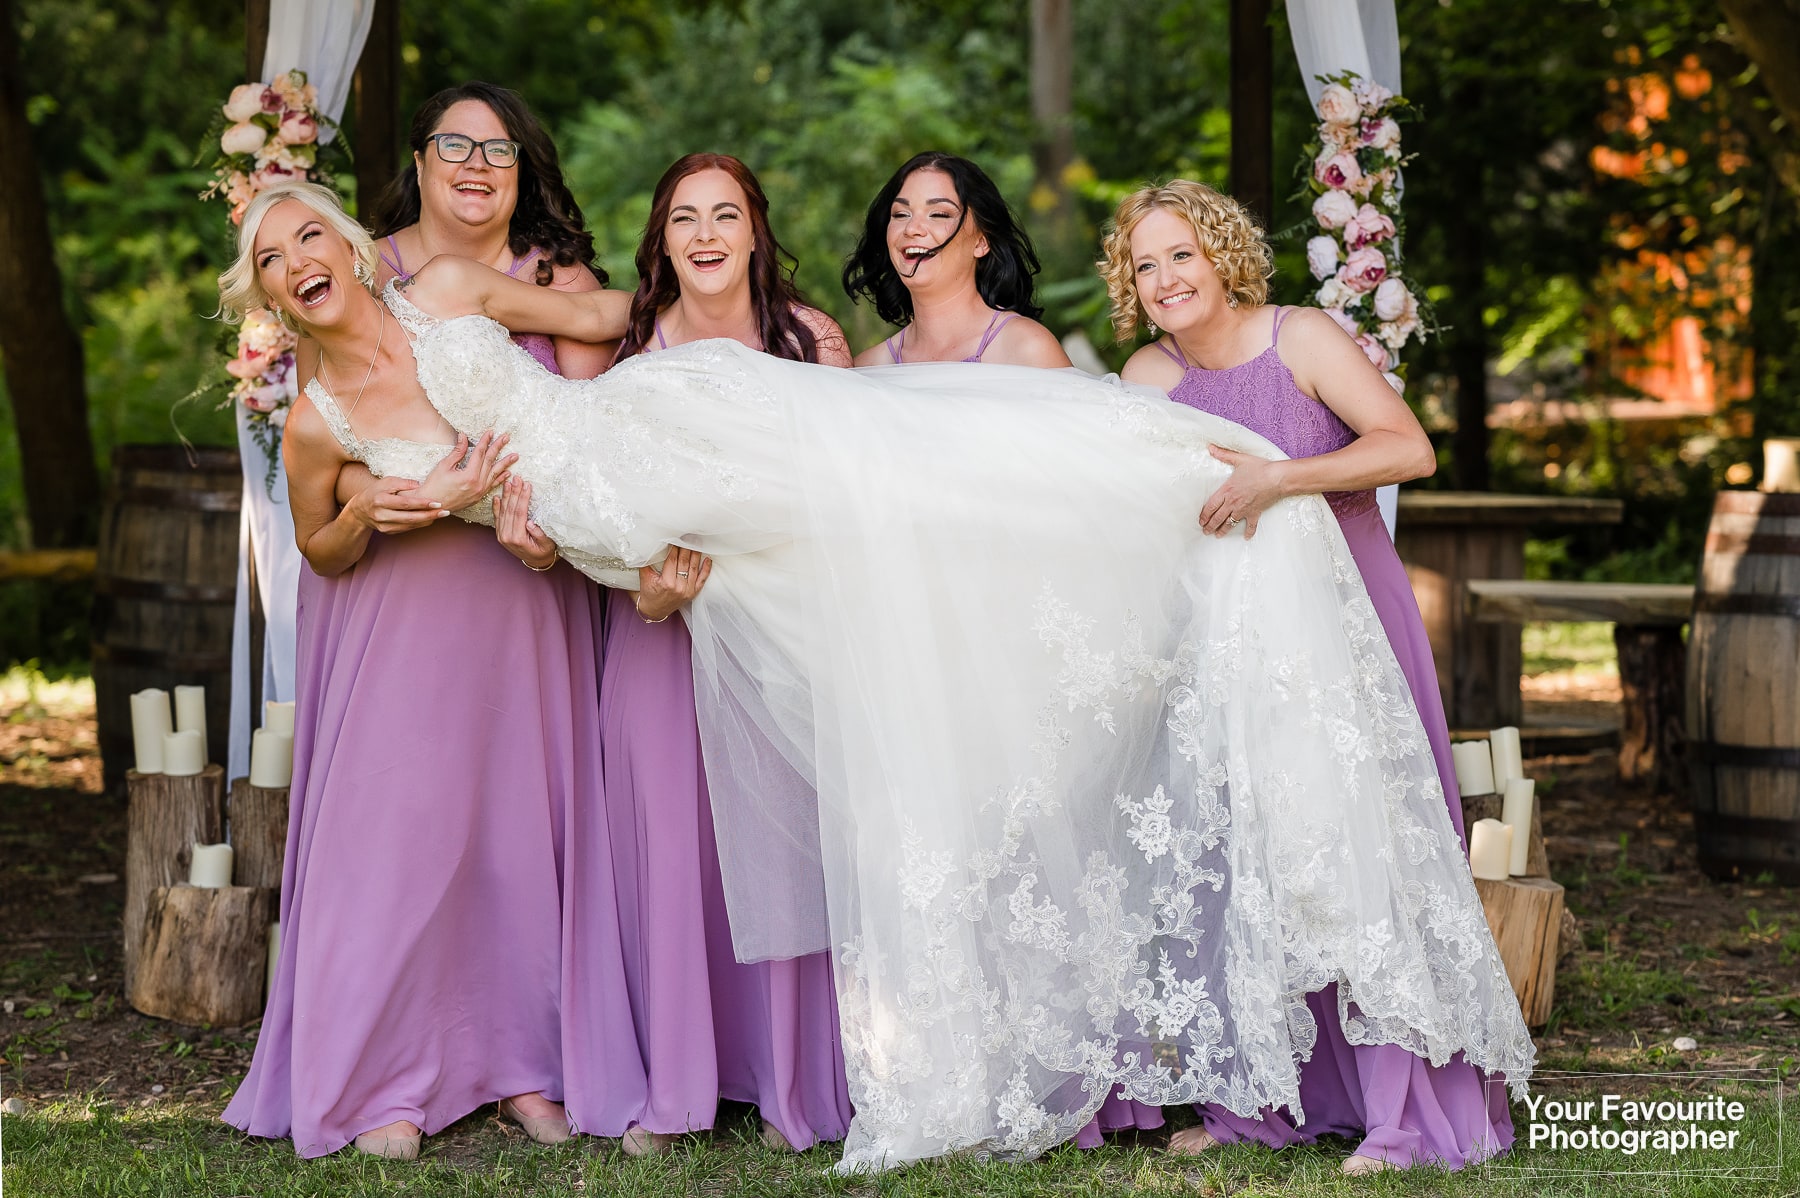 Bridesmaids attempting to lift bride